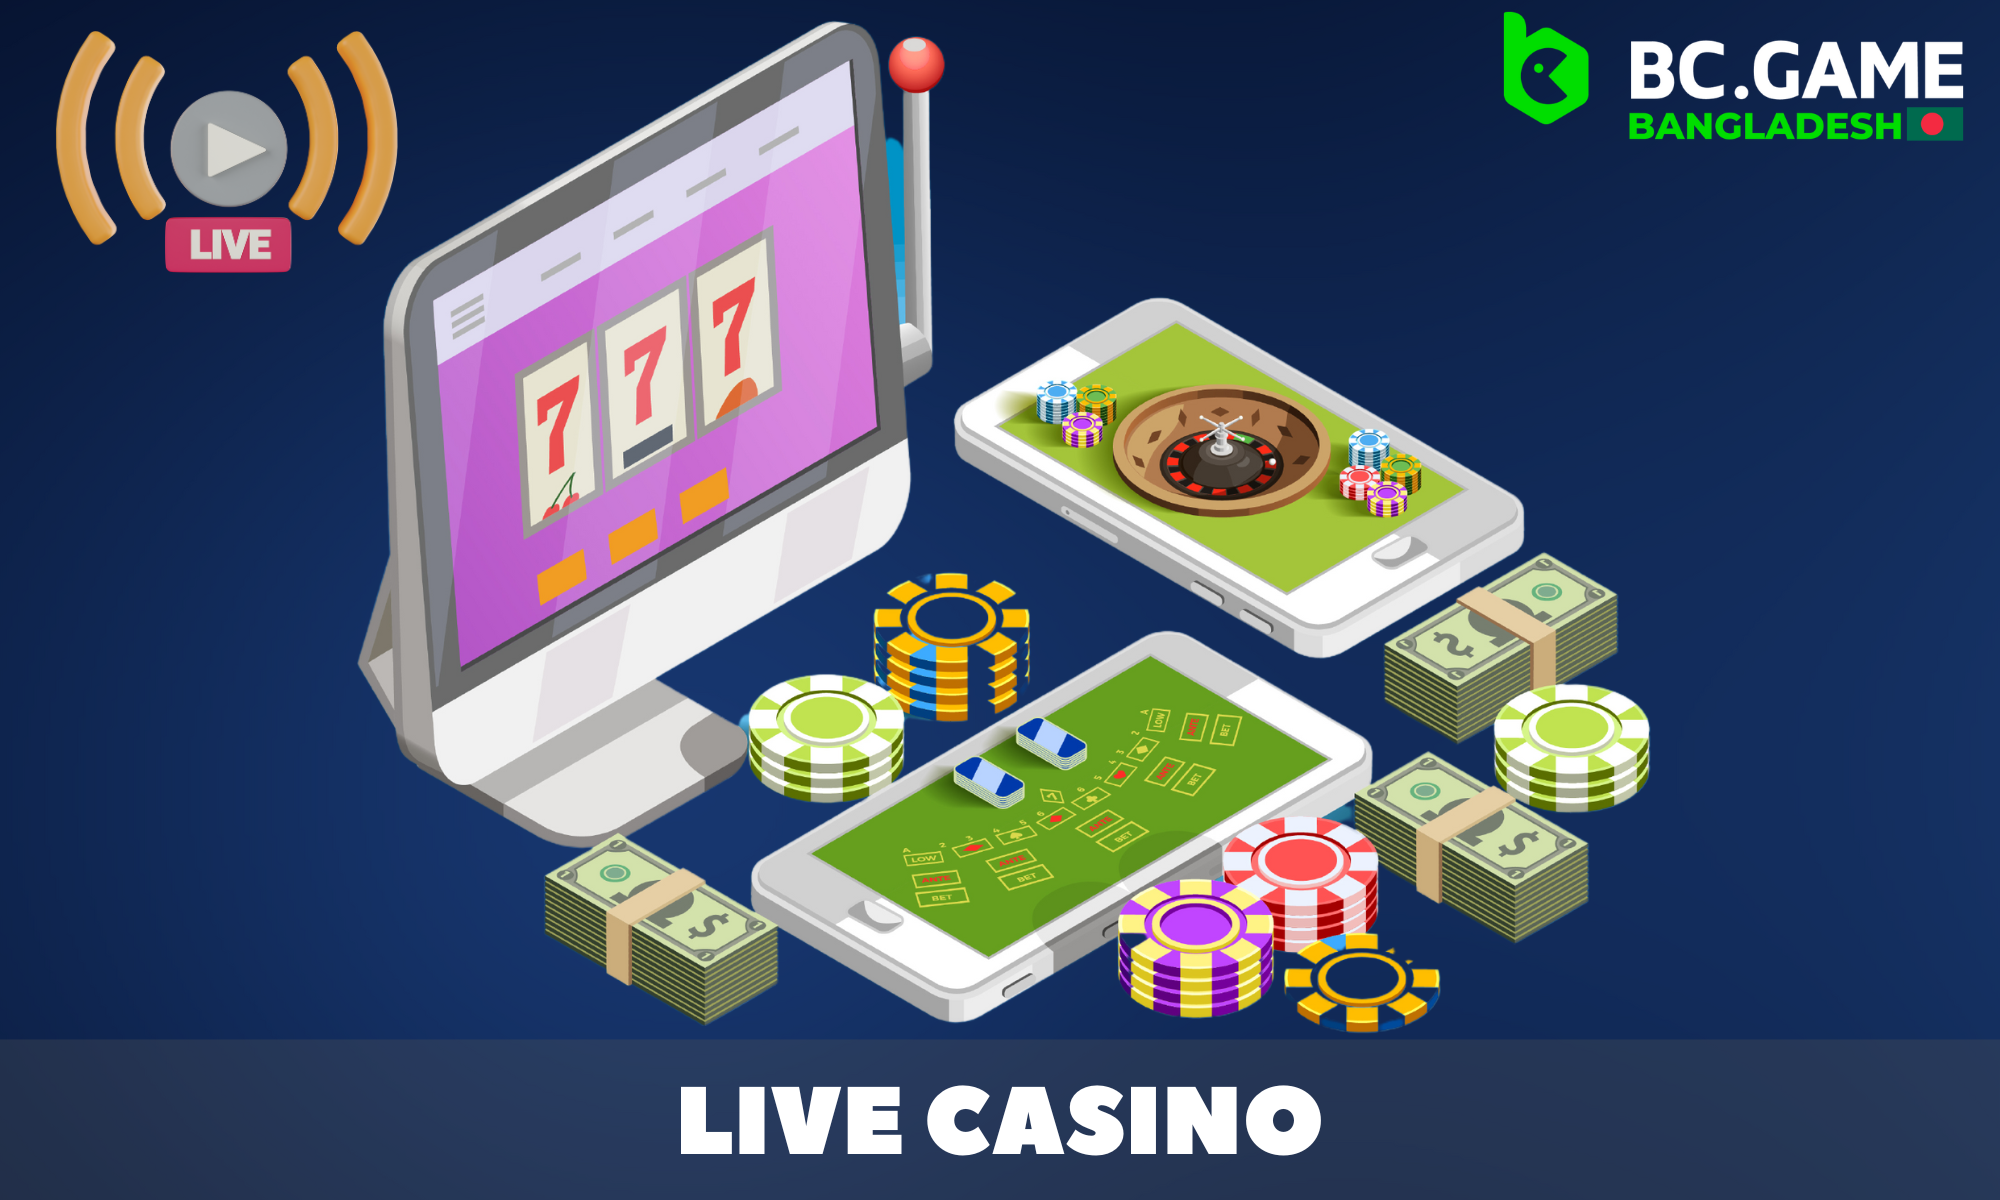 Players from Bangladesh have access to BC Game's live casino with over 30 games